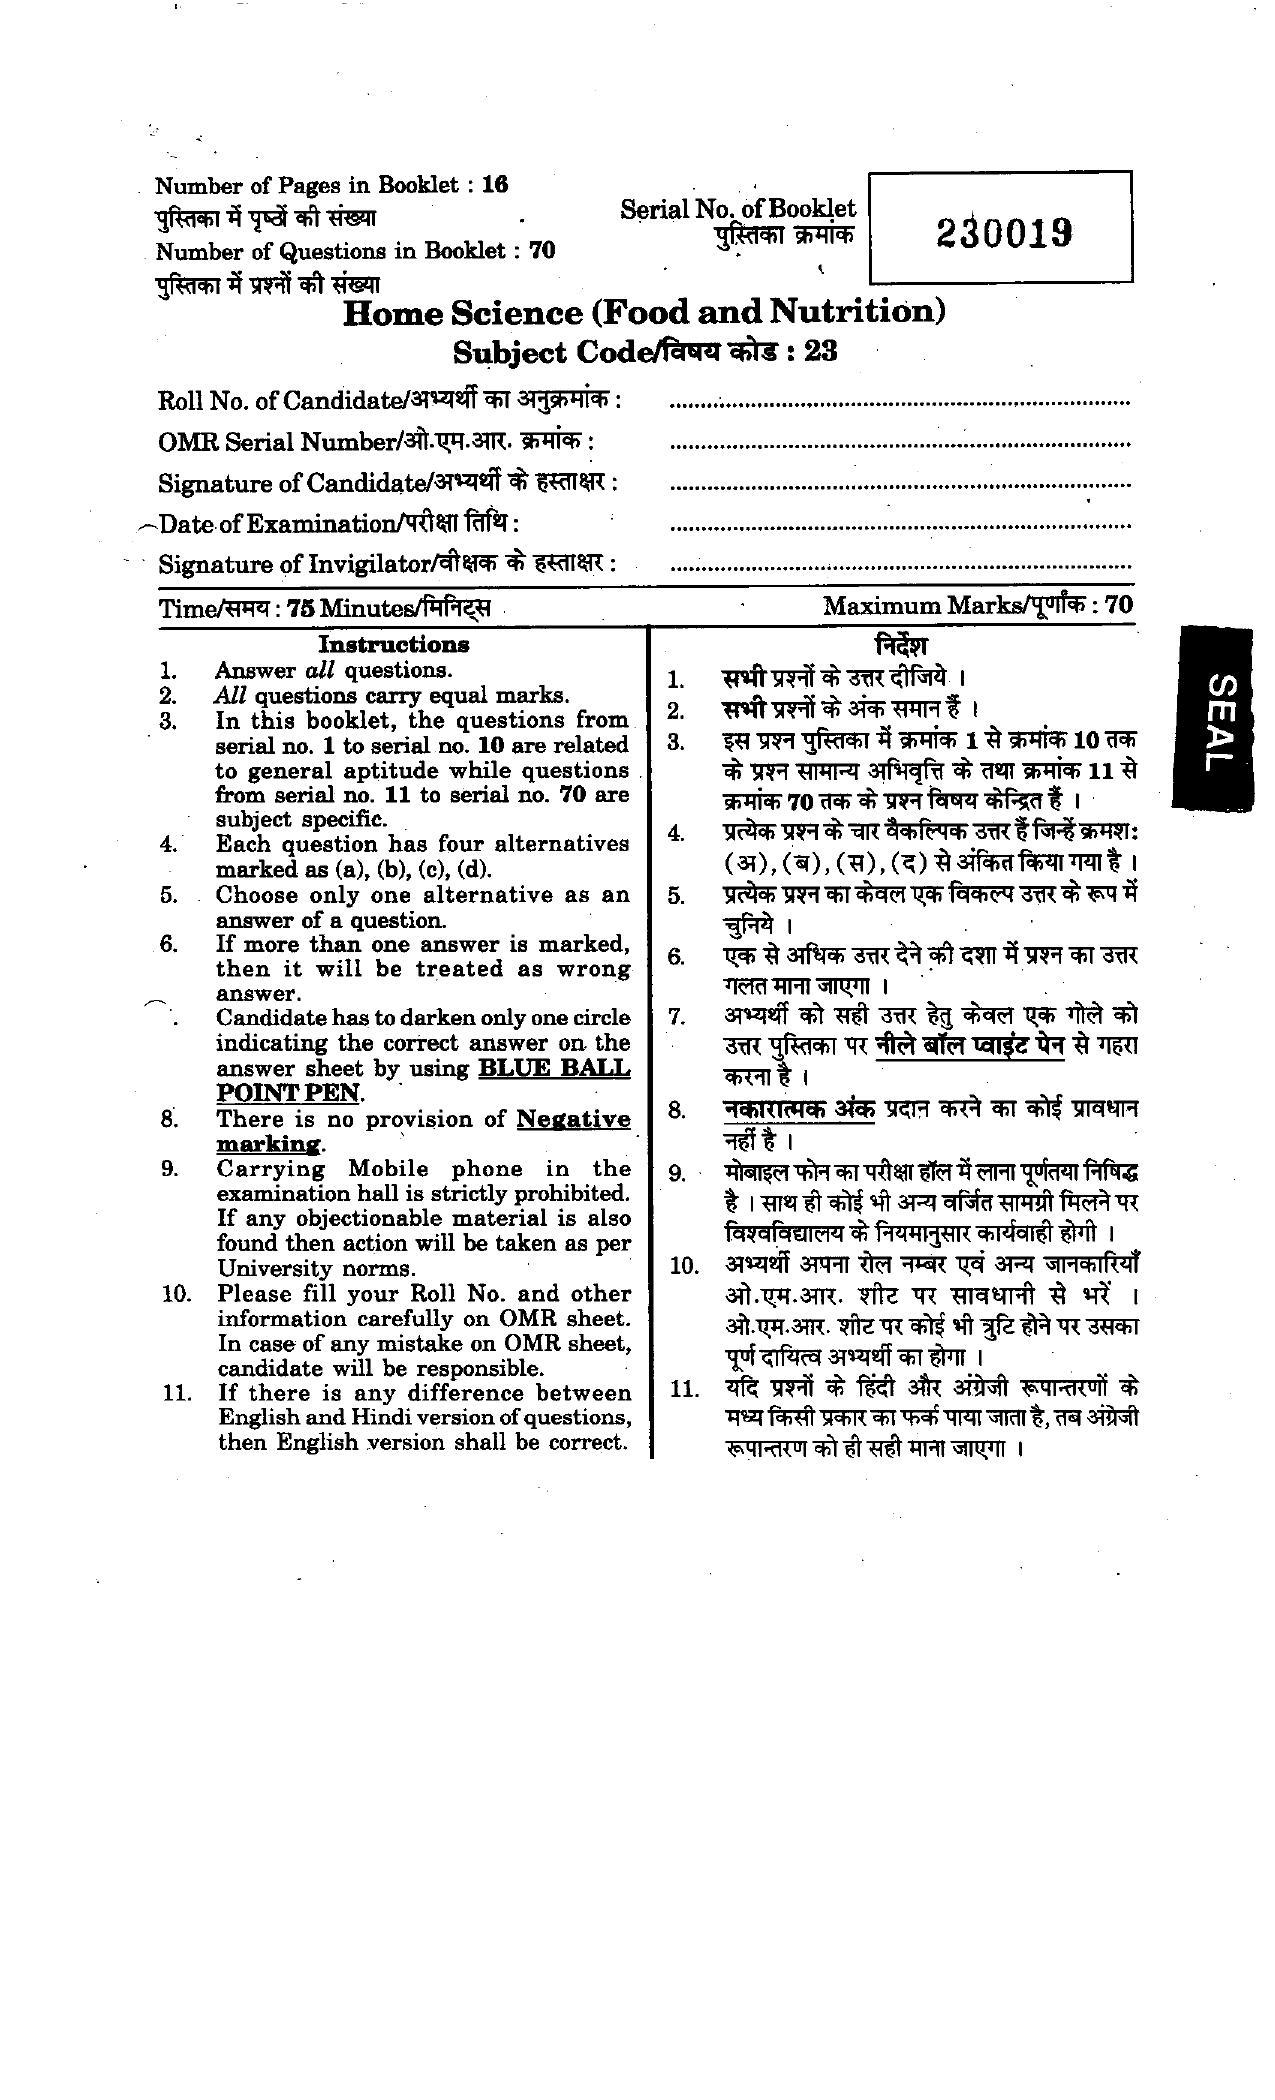 URATPG Home Science(Food & Nut.) 2012 Question Paper - Page 1